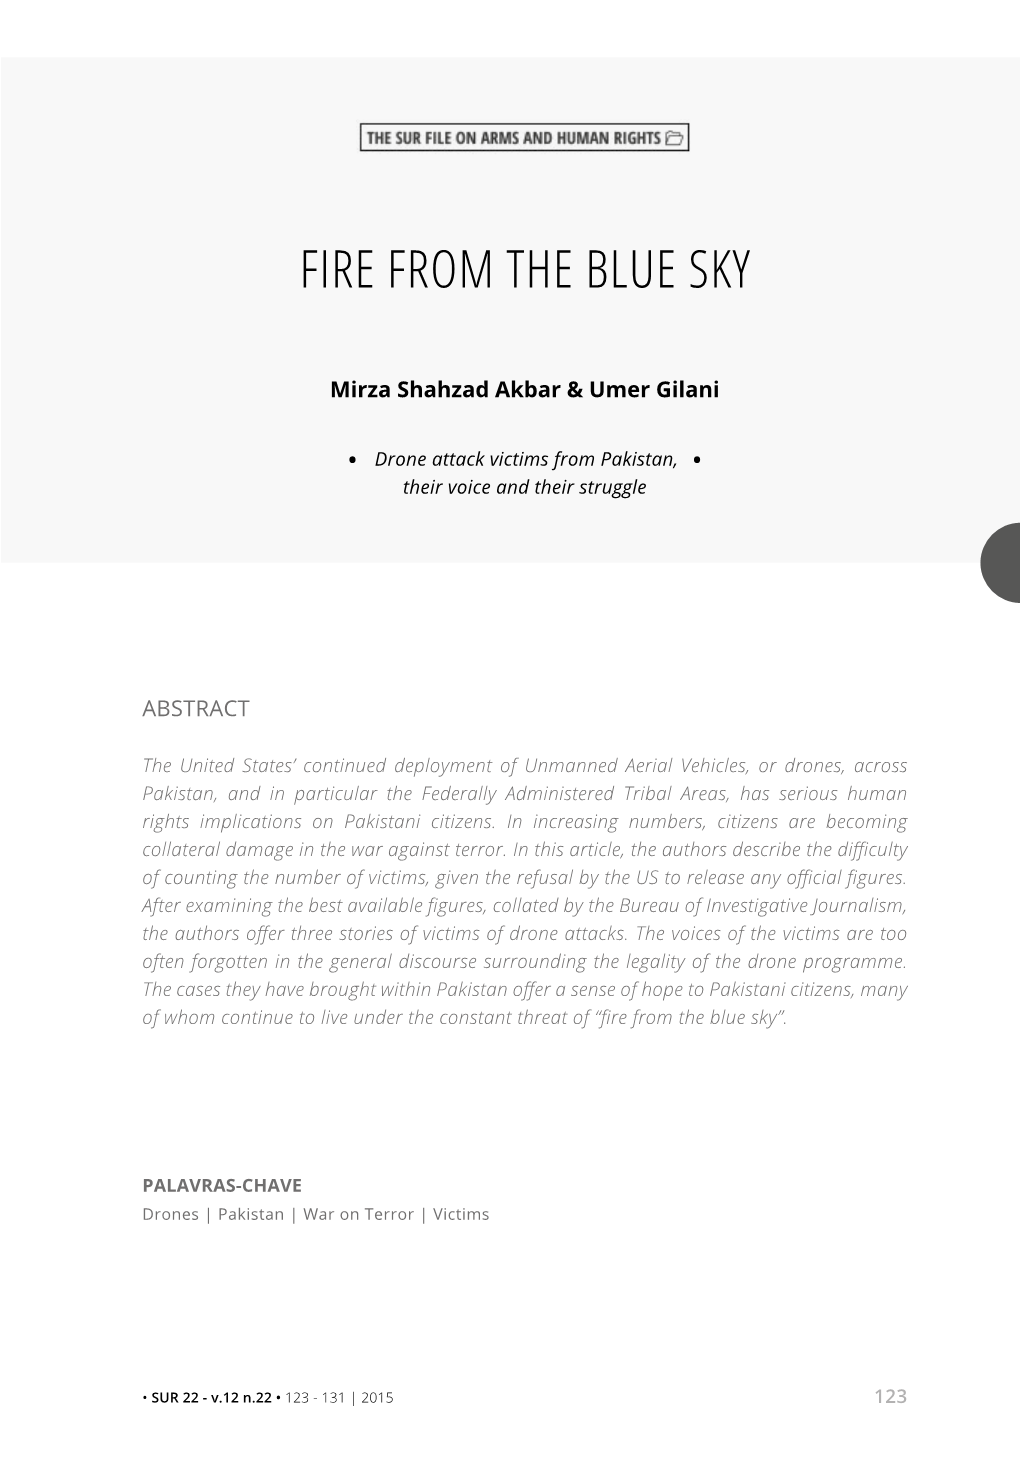 Fire from the Blue Sky